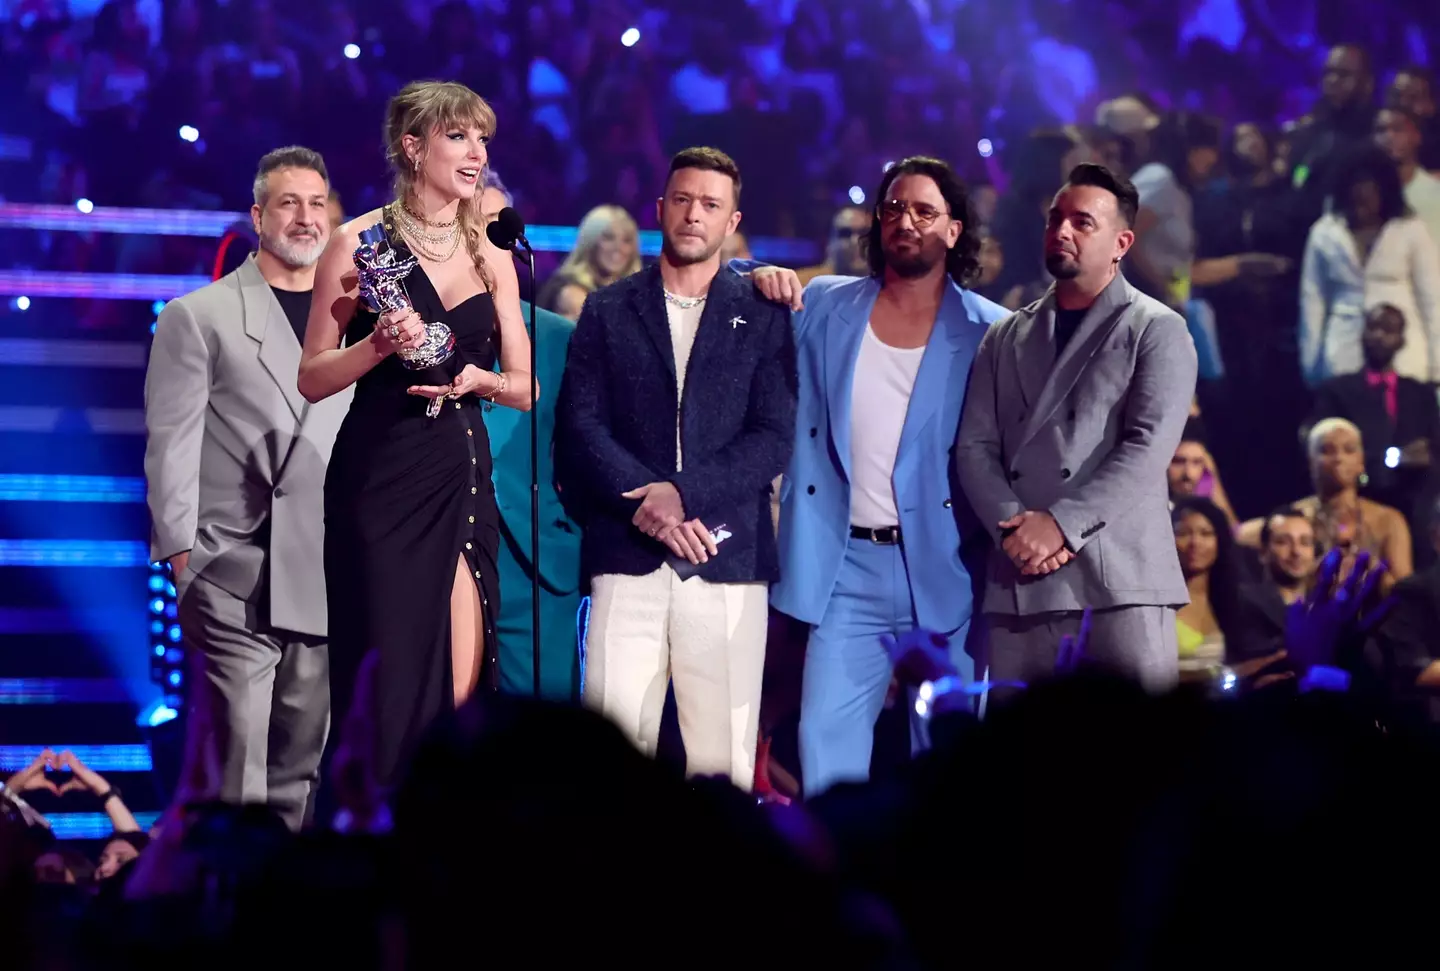 The band presented Taylor Swift with an award and announced a new single.